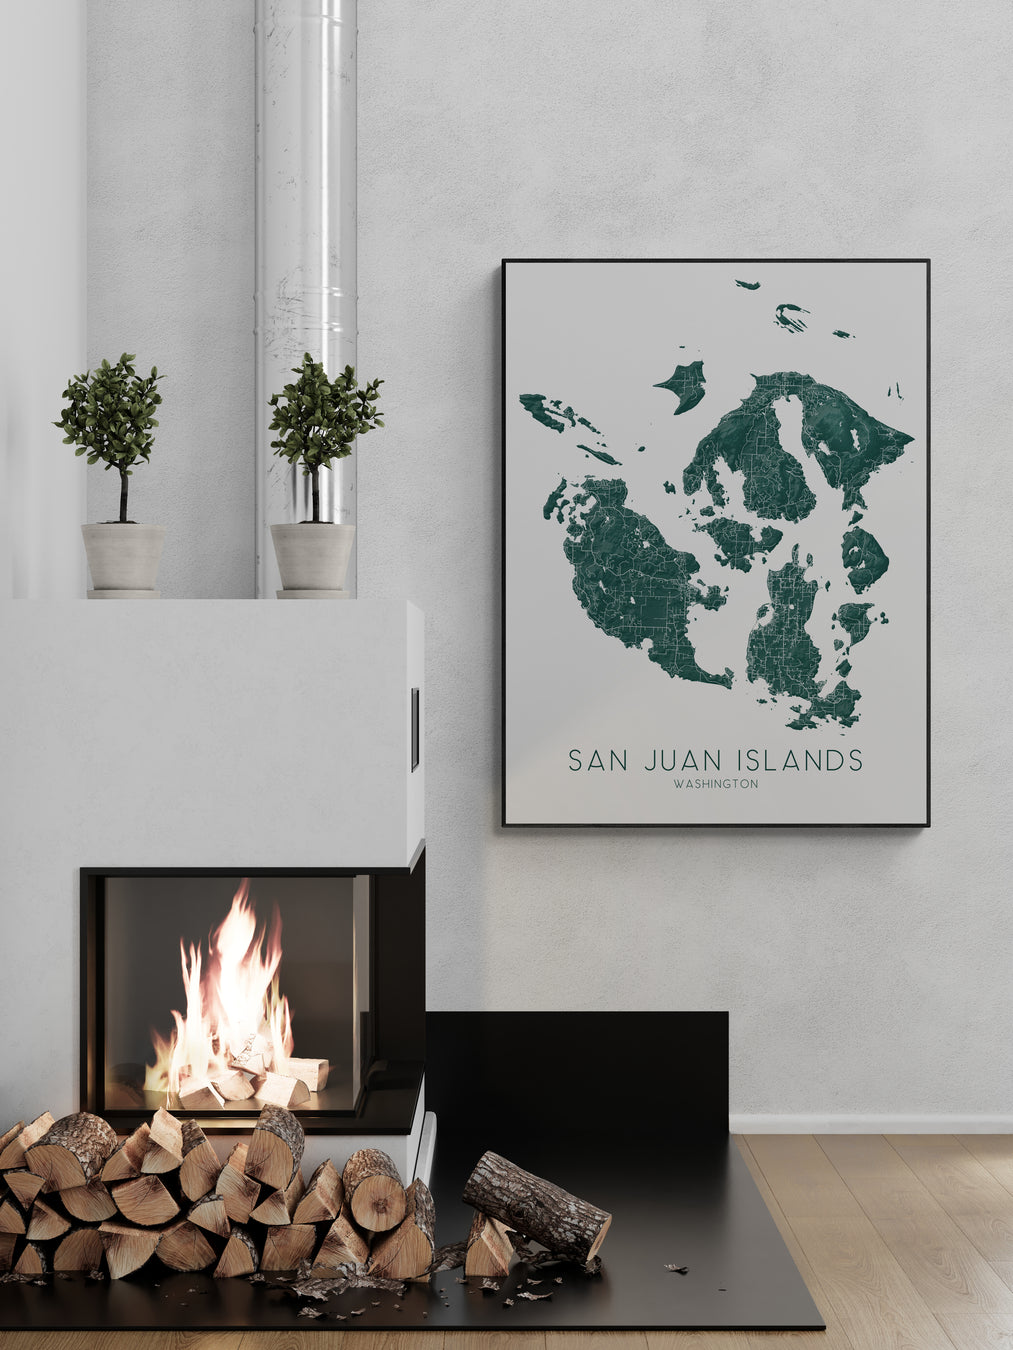 A pacific northwest collection of map art prints by Maps As Art.